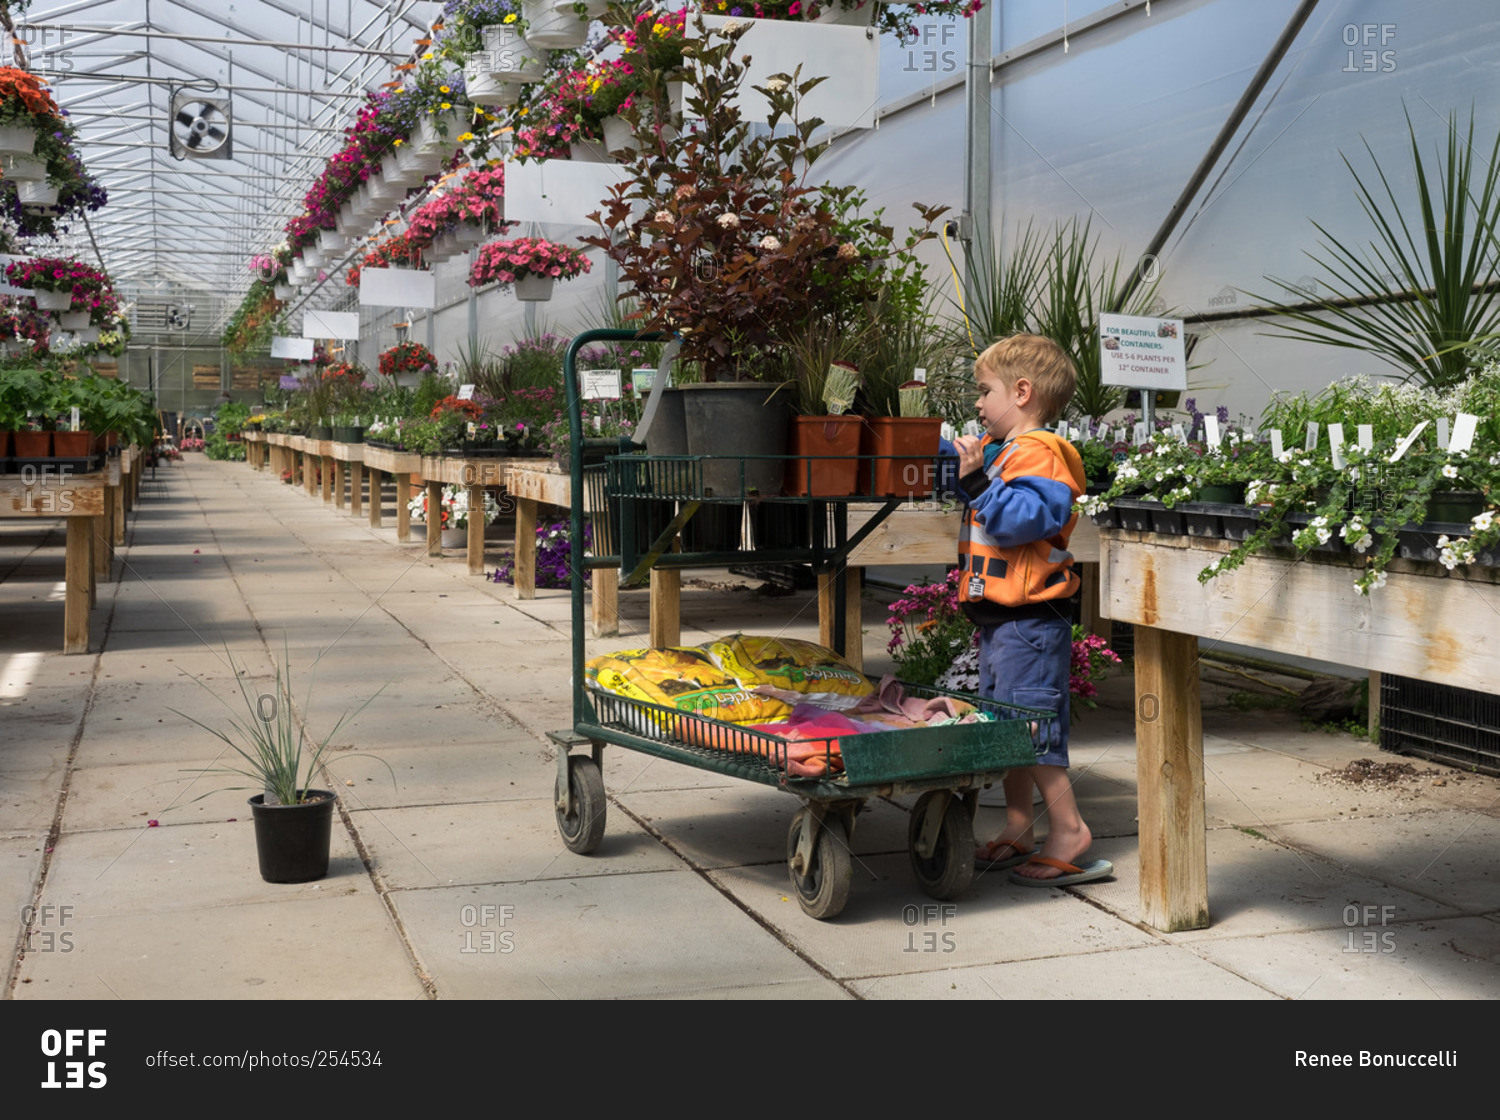 A boy helps shop for plants in a greenhouse